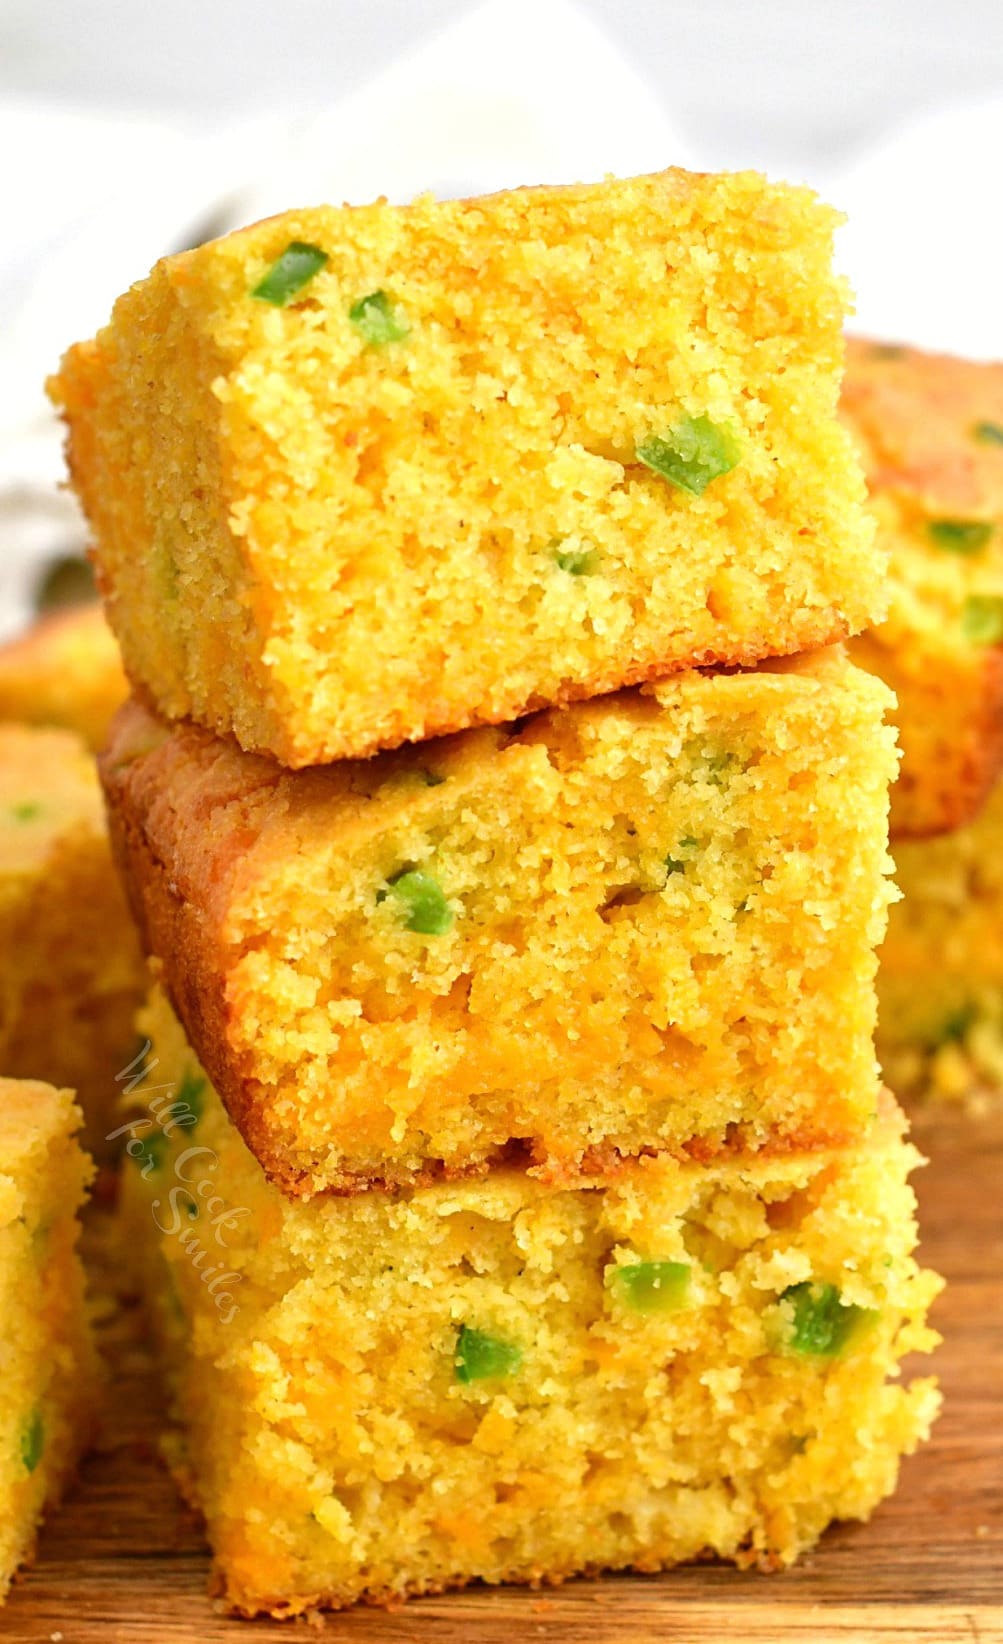 Jalapeno Cornbread (Moist and Cheesy!) - Easy Bread With Extra Flavor